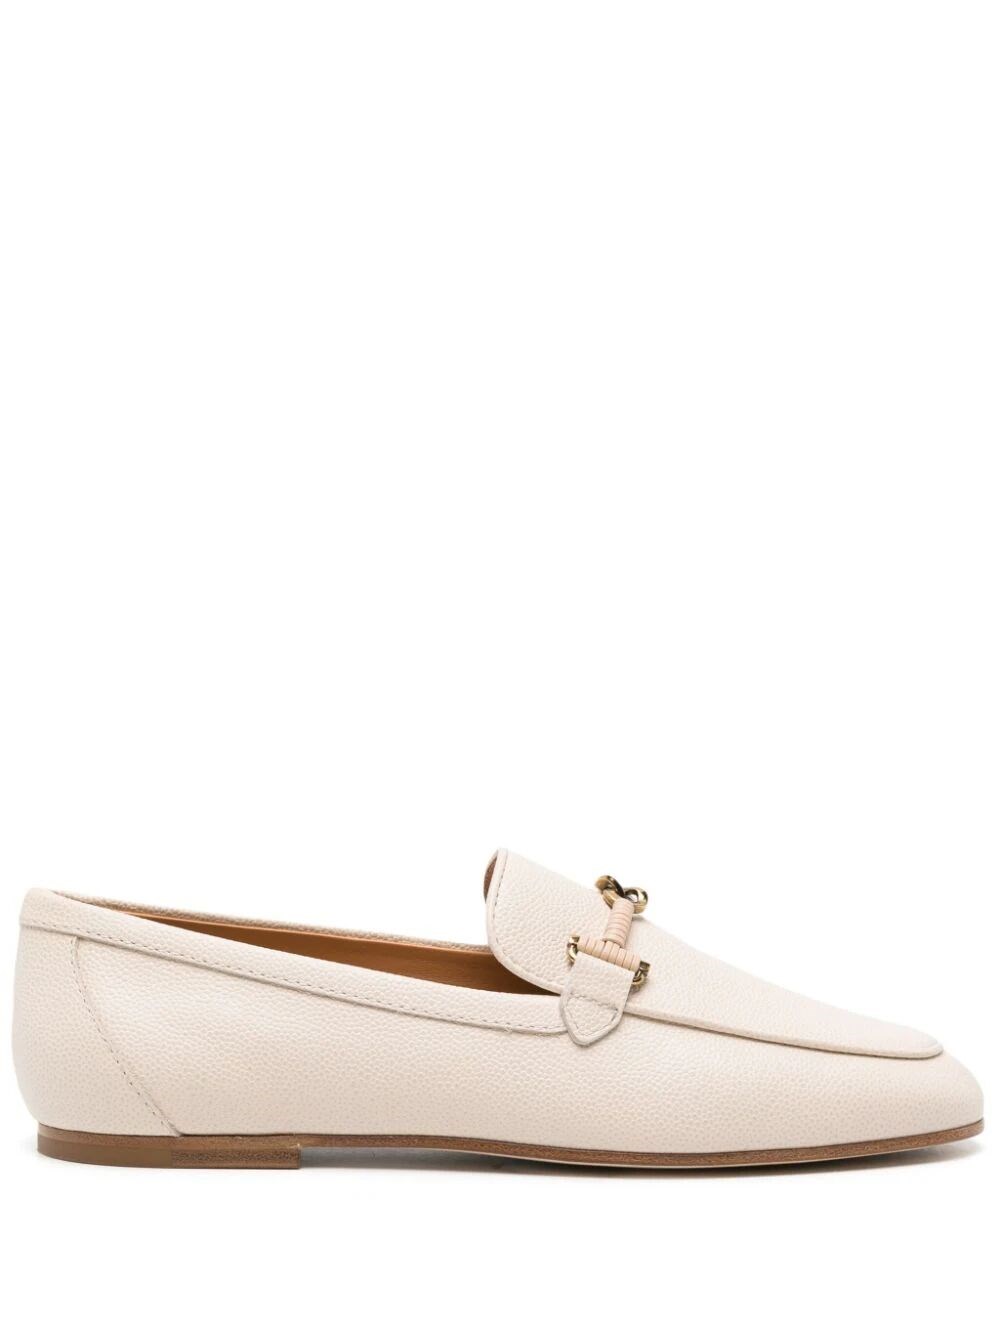 Tod's Slip-on Leather Loafers In Nude & Neutrals